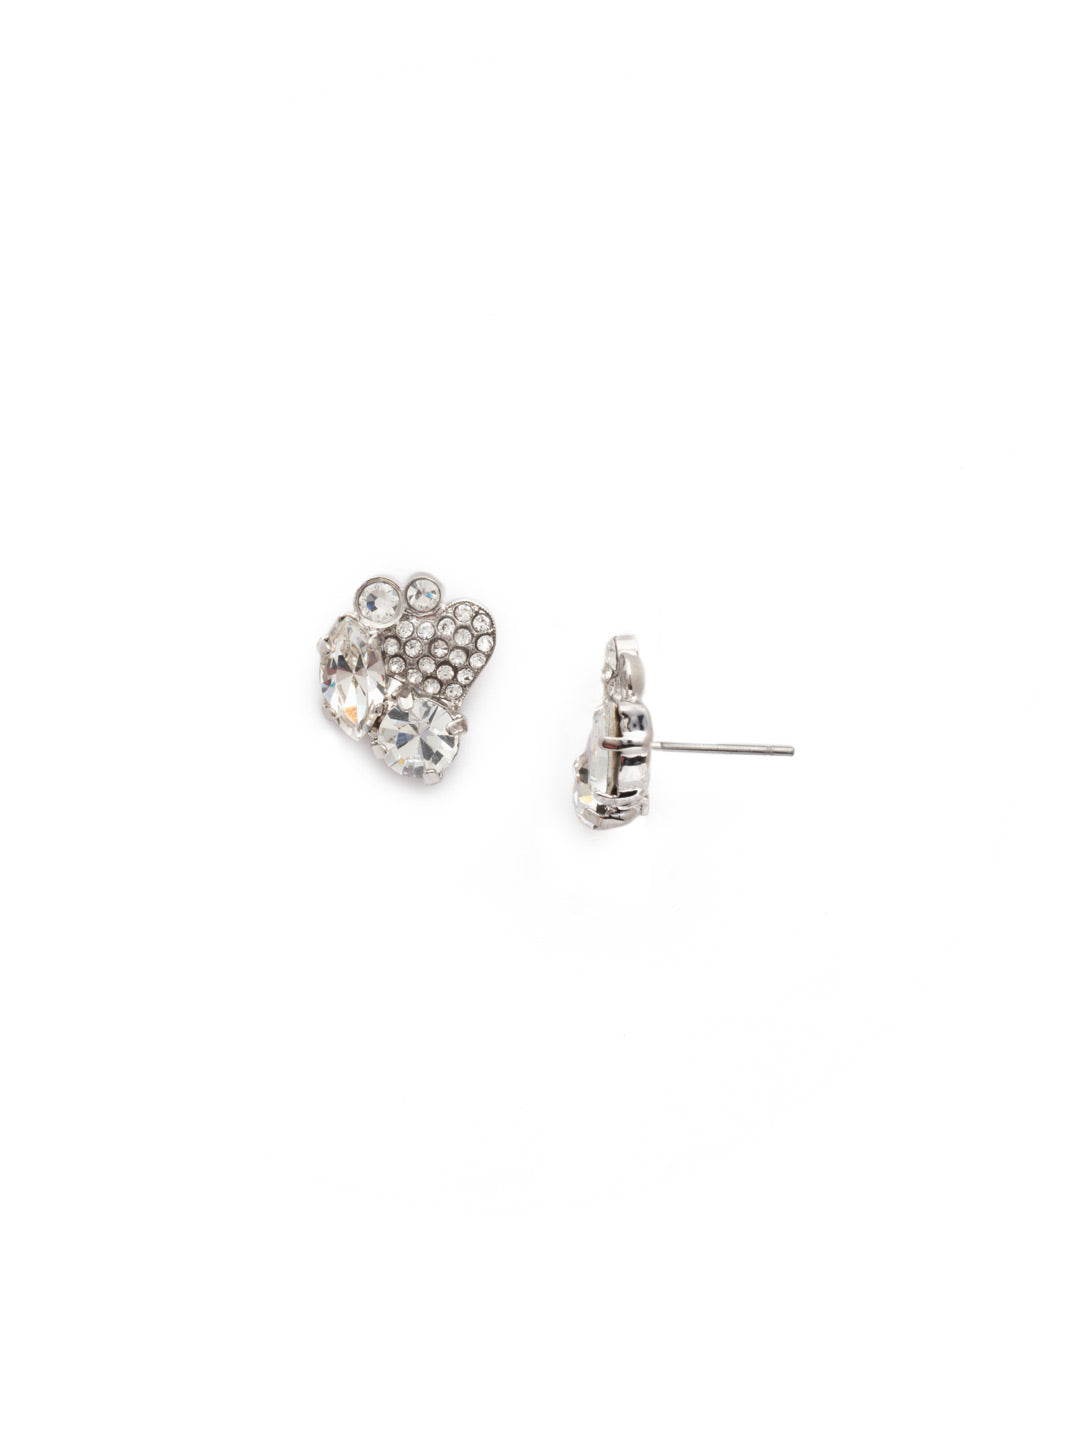 Lilo Stud Earrings - EER9PDCRY - <p>Fasten on the Lilo Stud Earrings and sparkle and shine all day - and night. The cluster of heart, marquis and round shapes make them extra special. From Sorrelli's Crystal collection in our Palladium finish.</p>